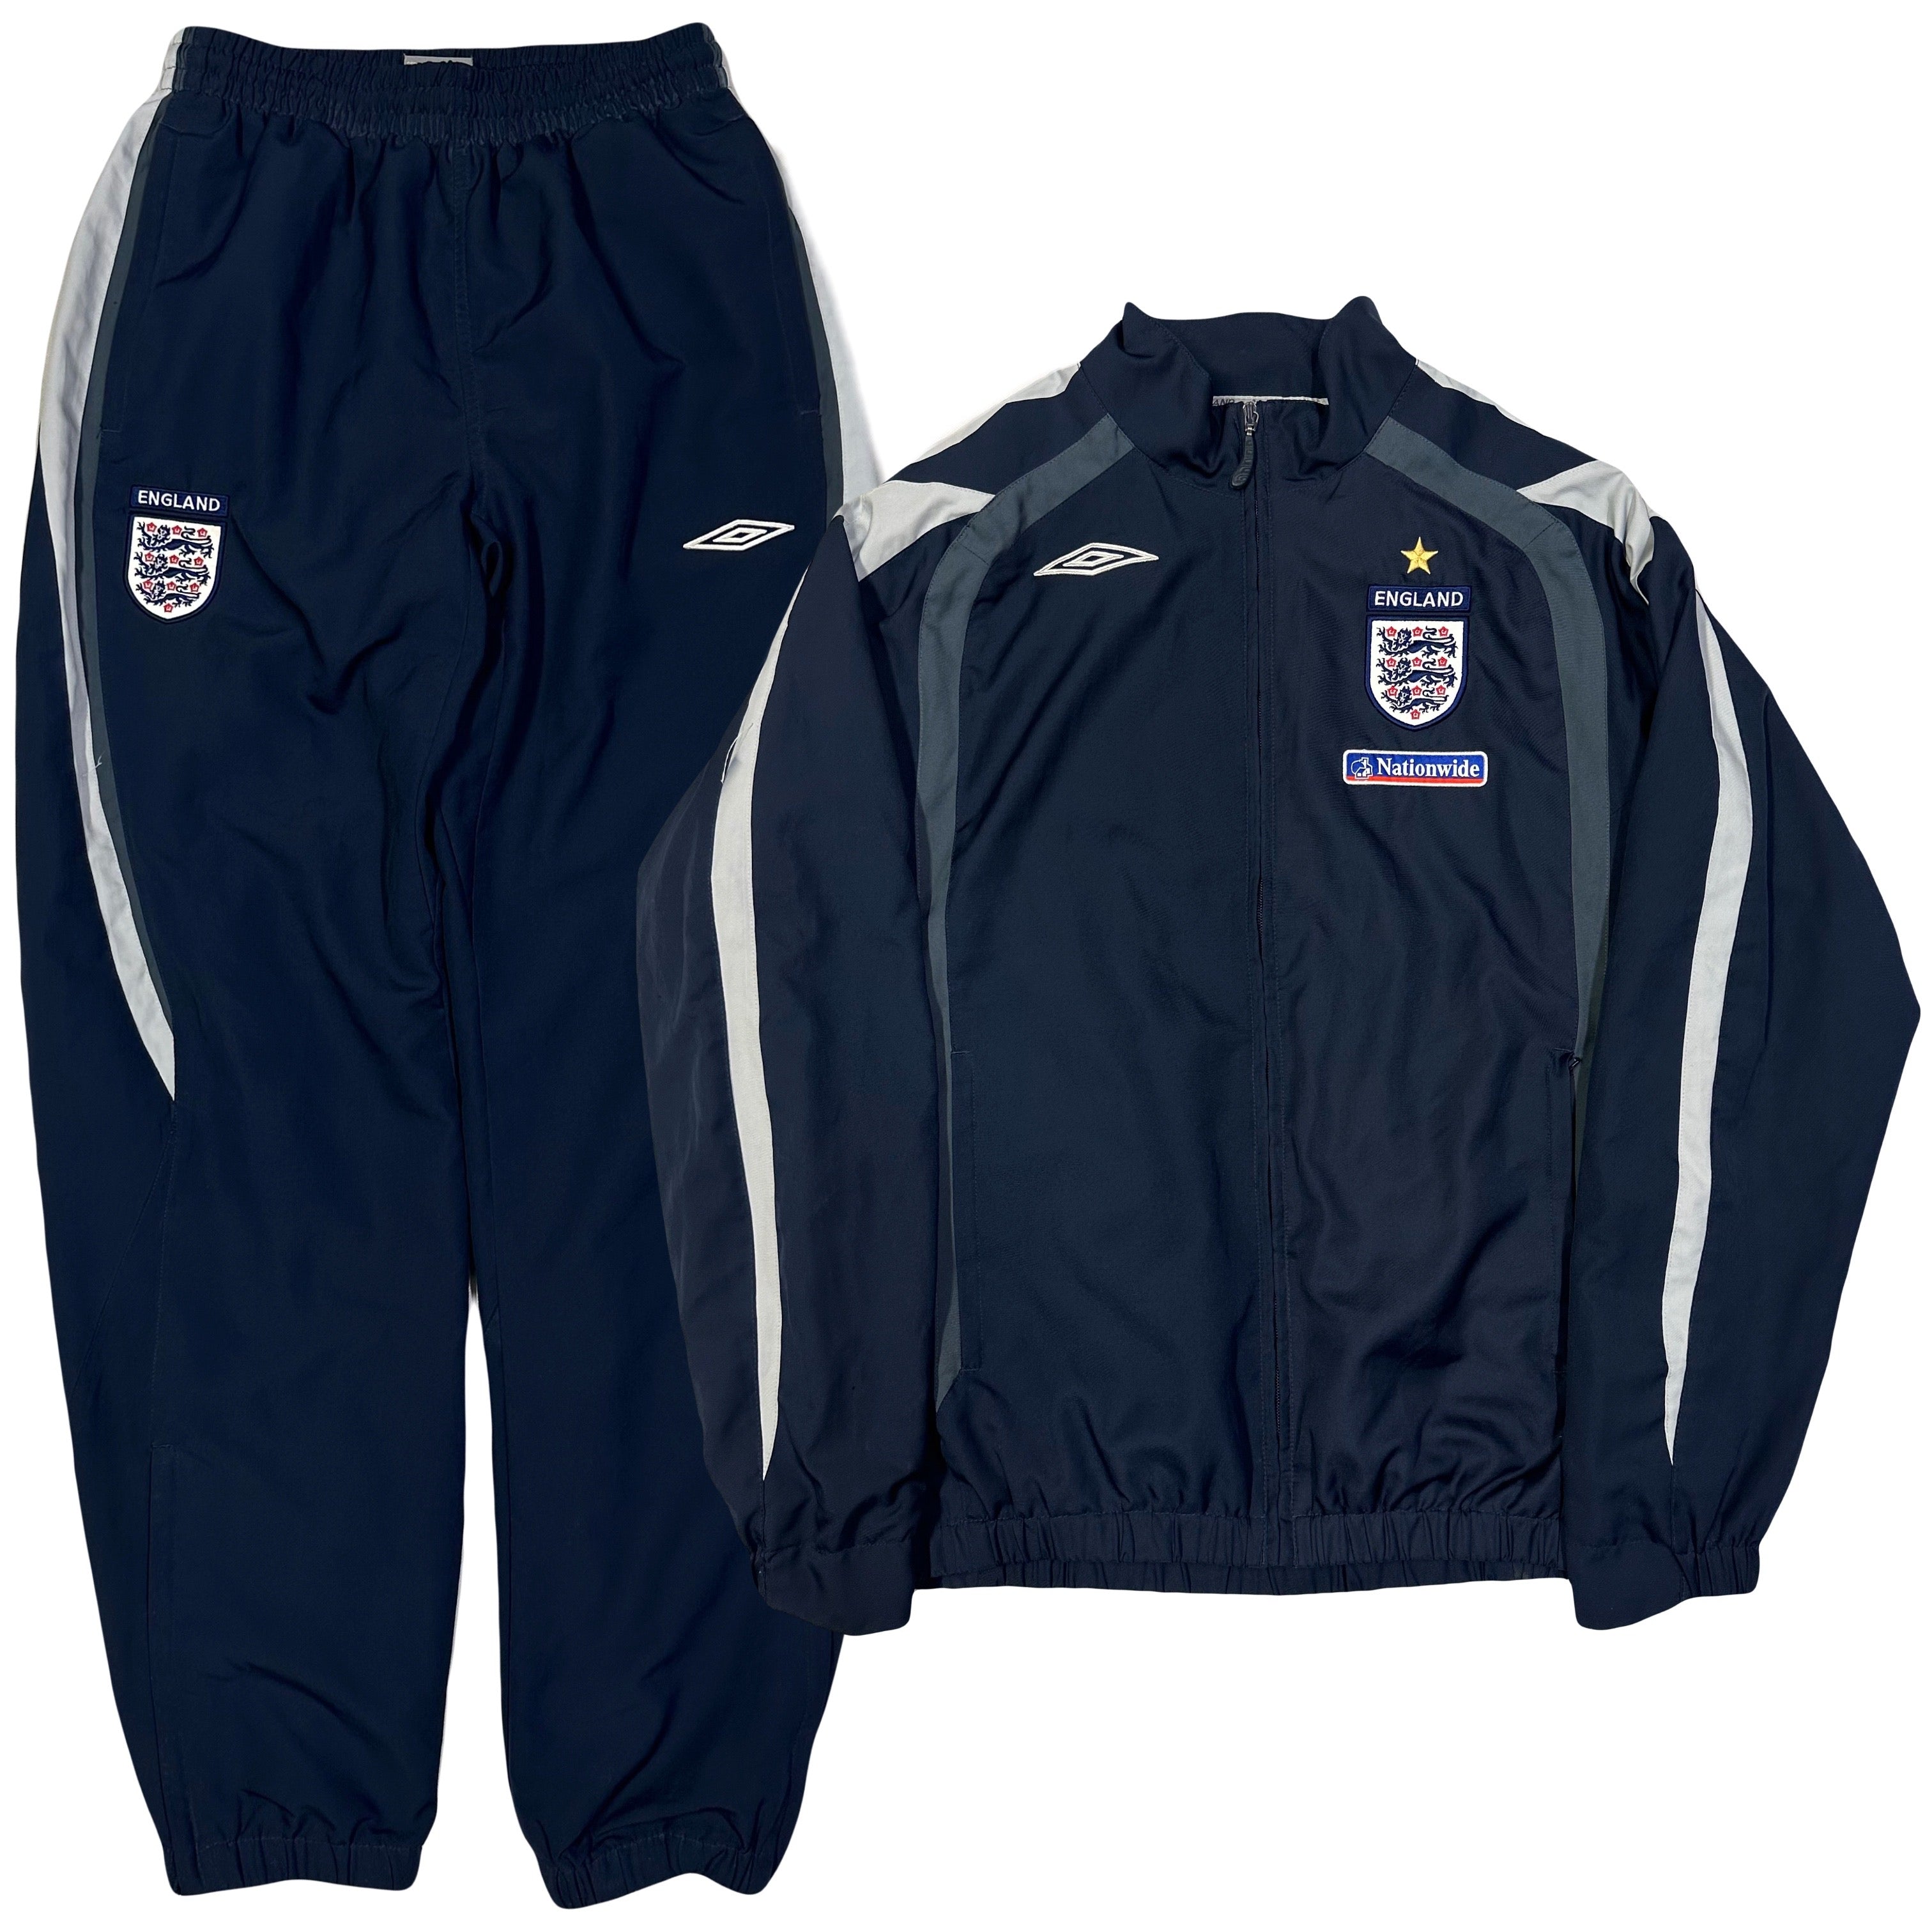 Umbro England 2007/09 Tracksuit In Navy ( M )